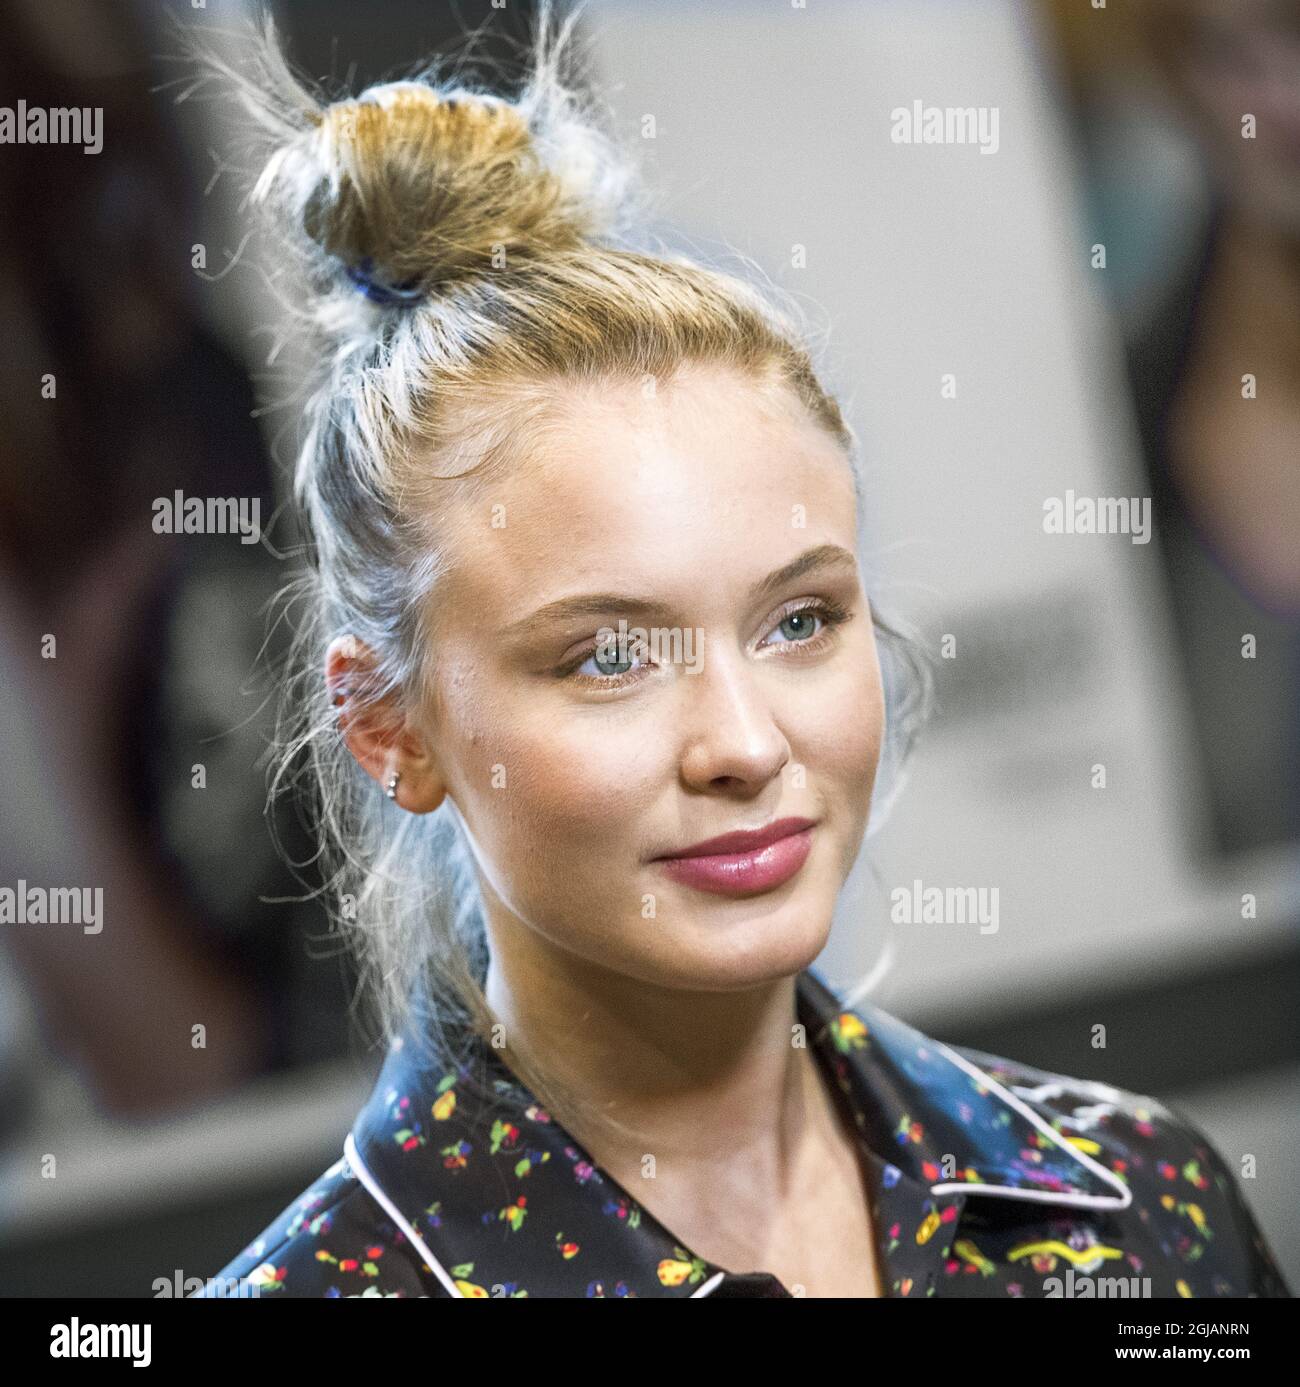 STOCKHOLM 20170531 A portrait of Swedish record artist Zara Larsson was  invoked in the exhibition of pictures of famous Swedes which welcomes  arrival to Arlanda Airport, Sweden on Wednesday. The exhibition opened